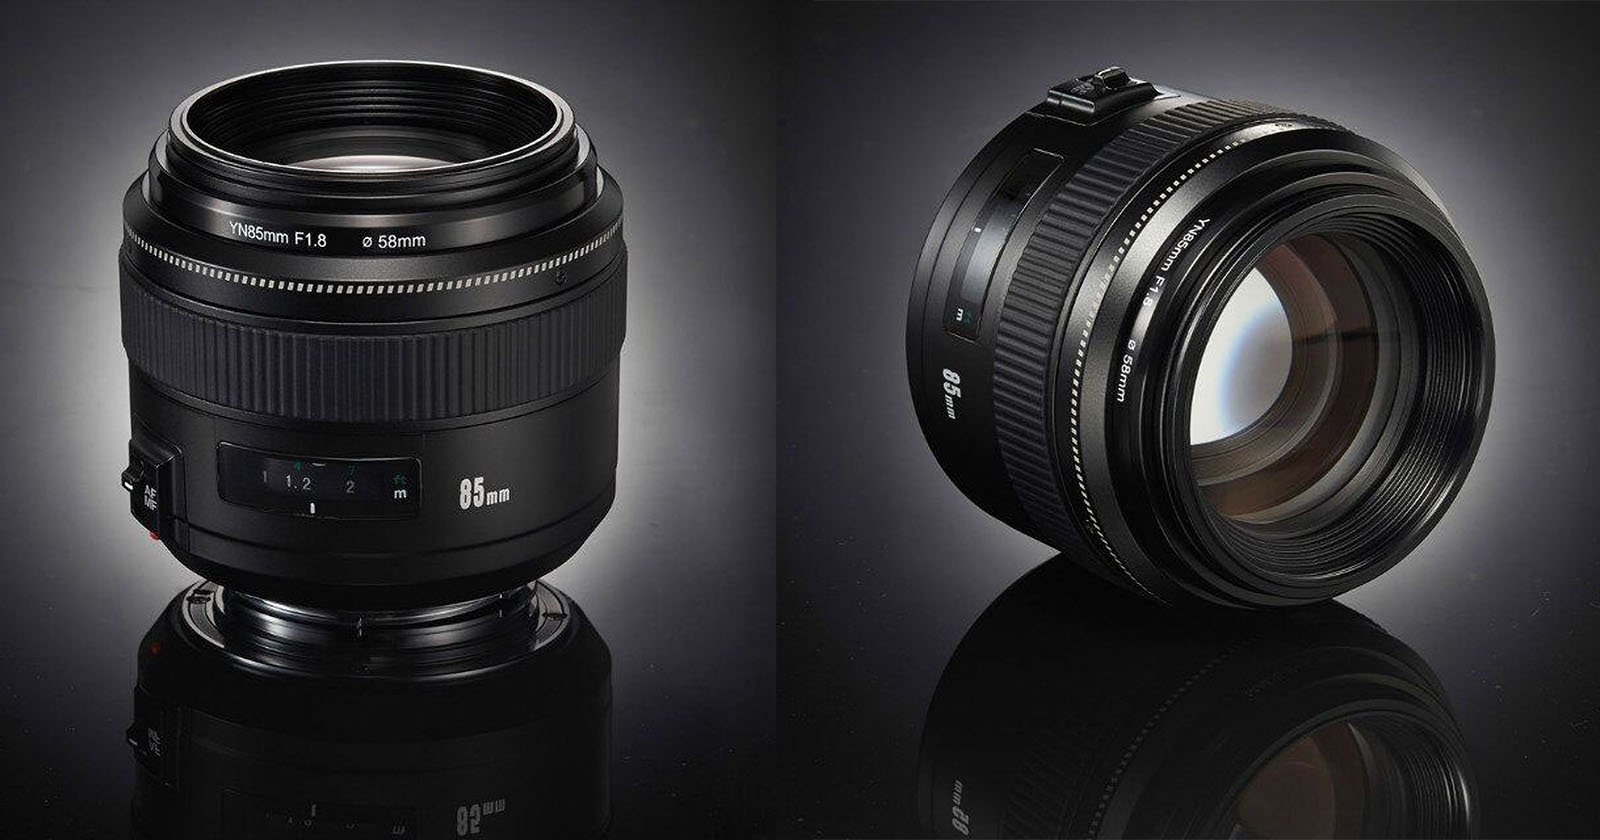 Sneak Peek: This is the Yongnuo 85mm f/1.8 for Nikon Photographers